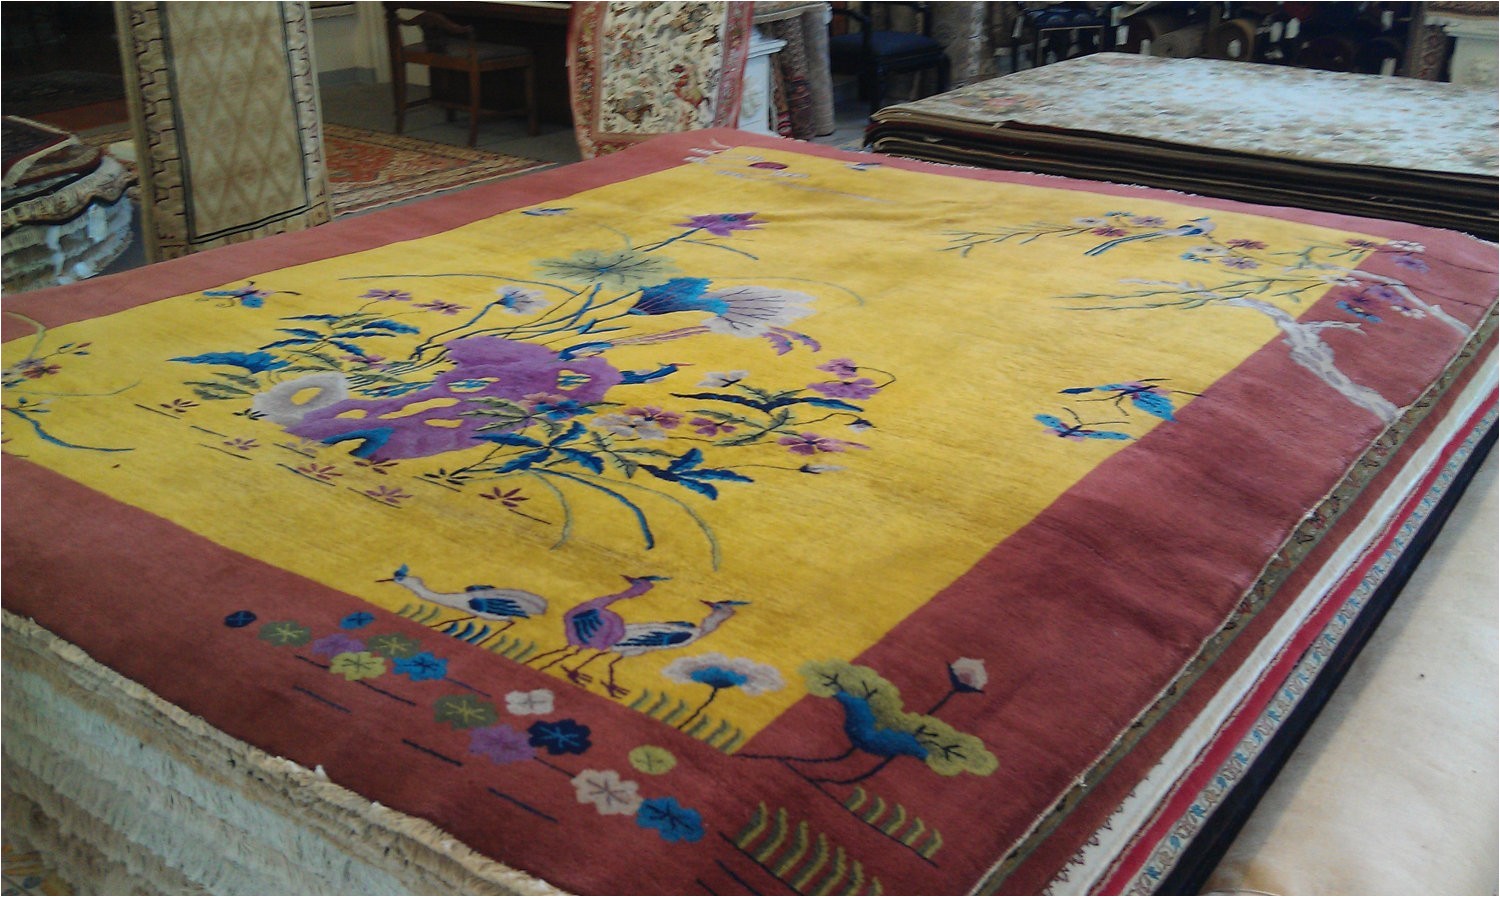 Art Deco Chinese Rugs for Sale Inspirational Art Deco Rugs for Sale Uk Innovative Rugs